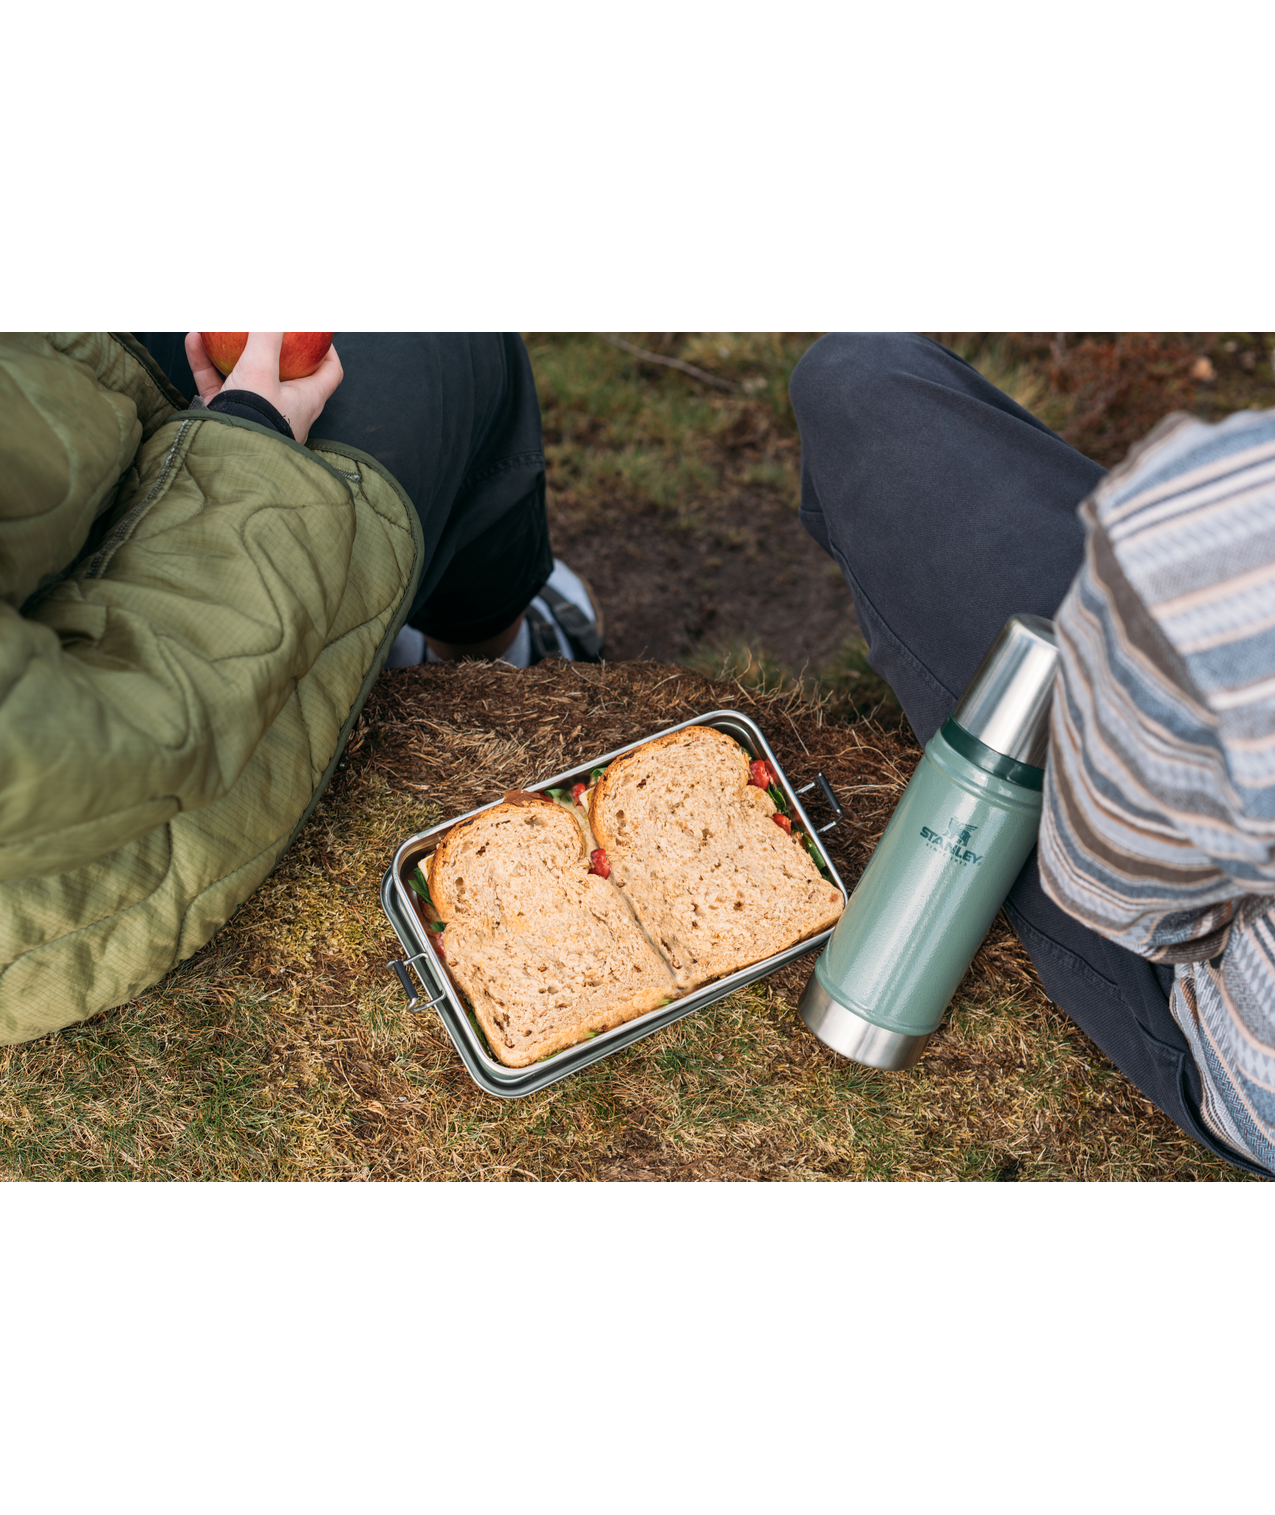 Stanley - The Legendary Classic Lunch Box – Western Fire Supply